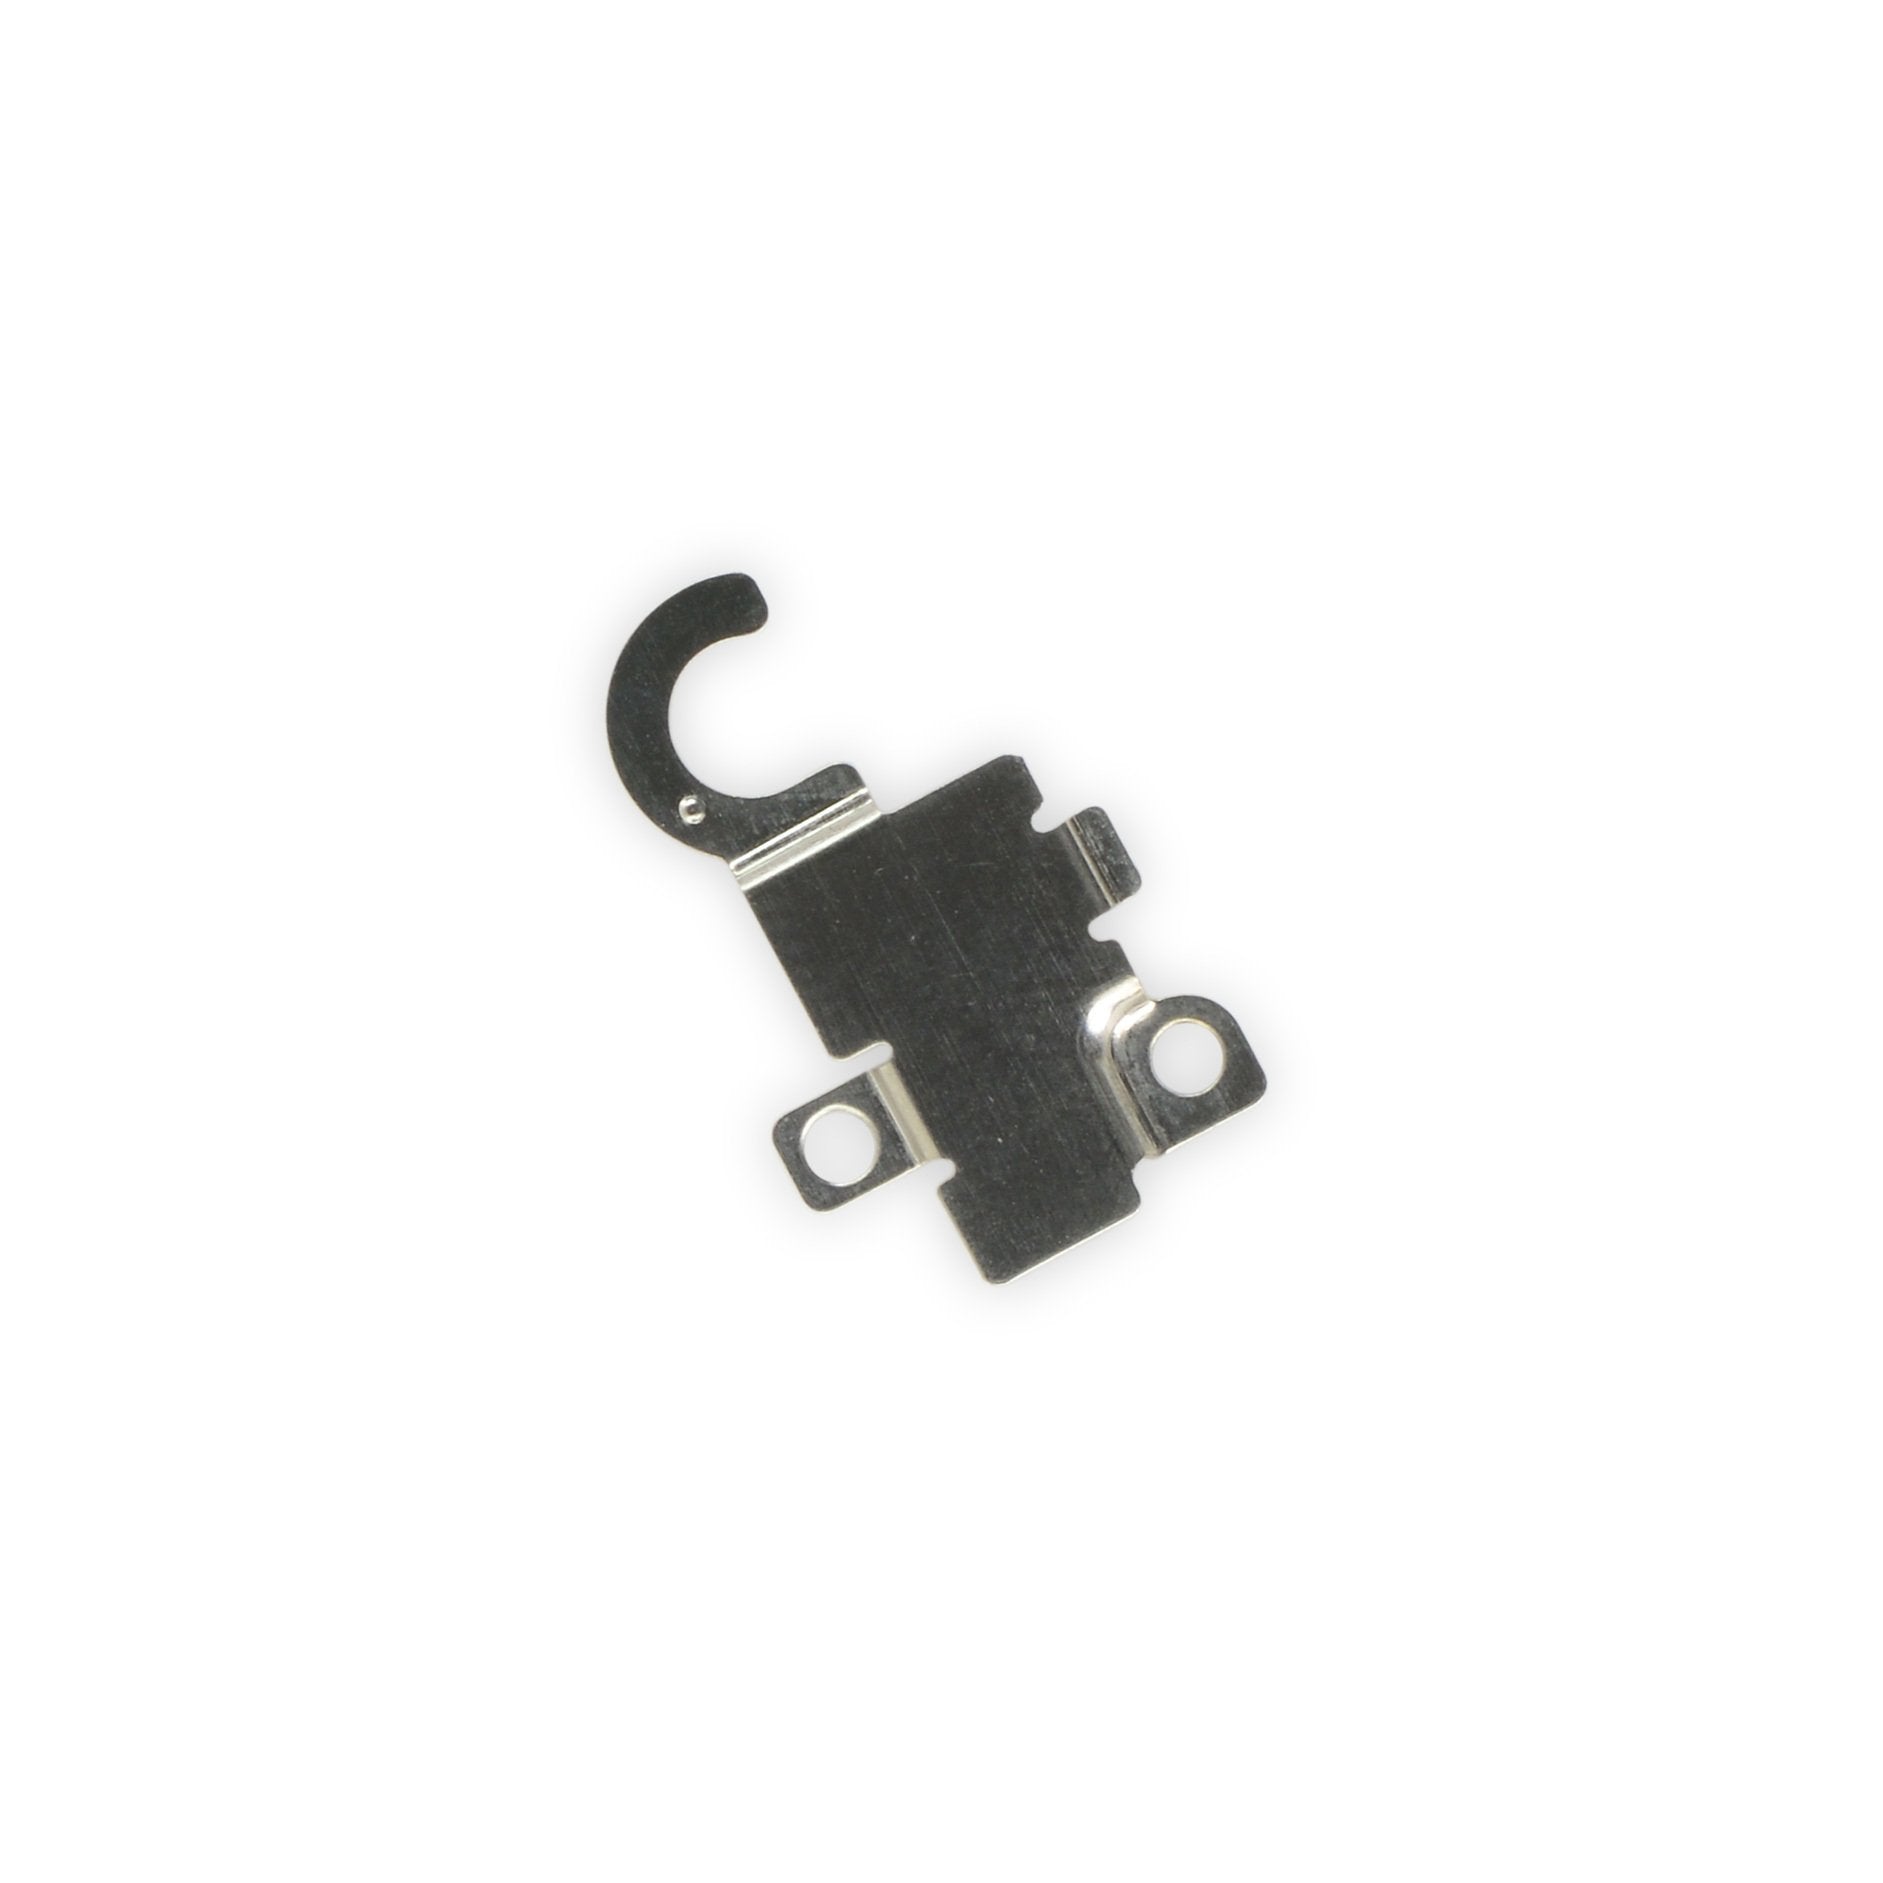 iPhone 6s Plus Flash and Microphone Bracket